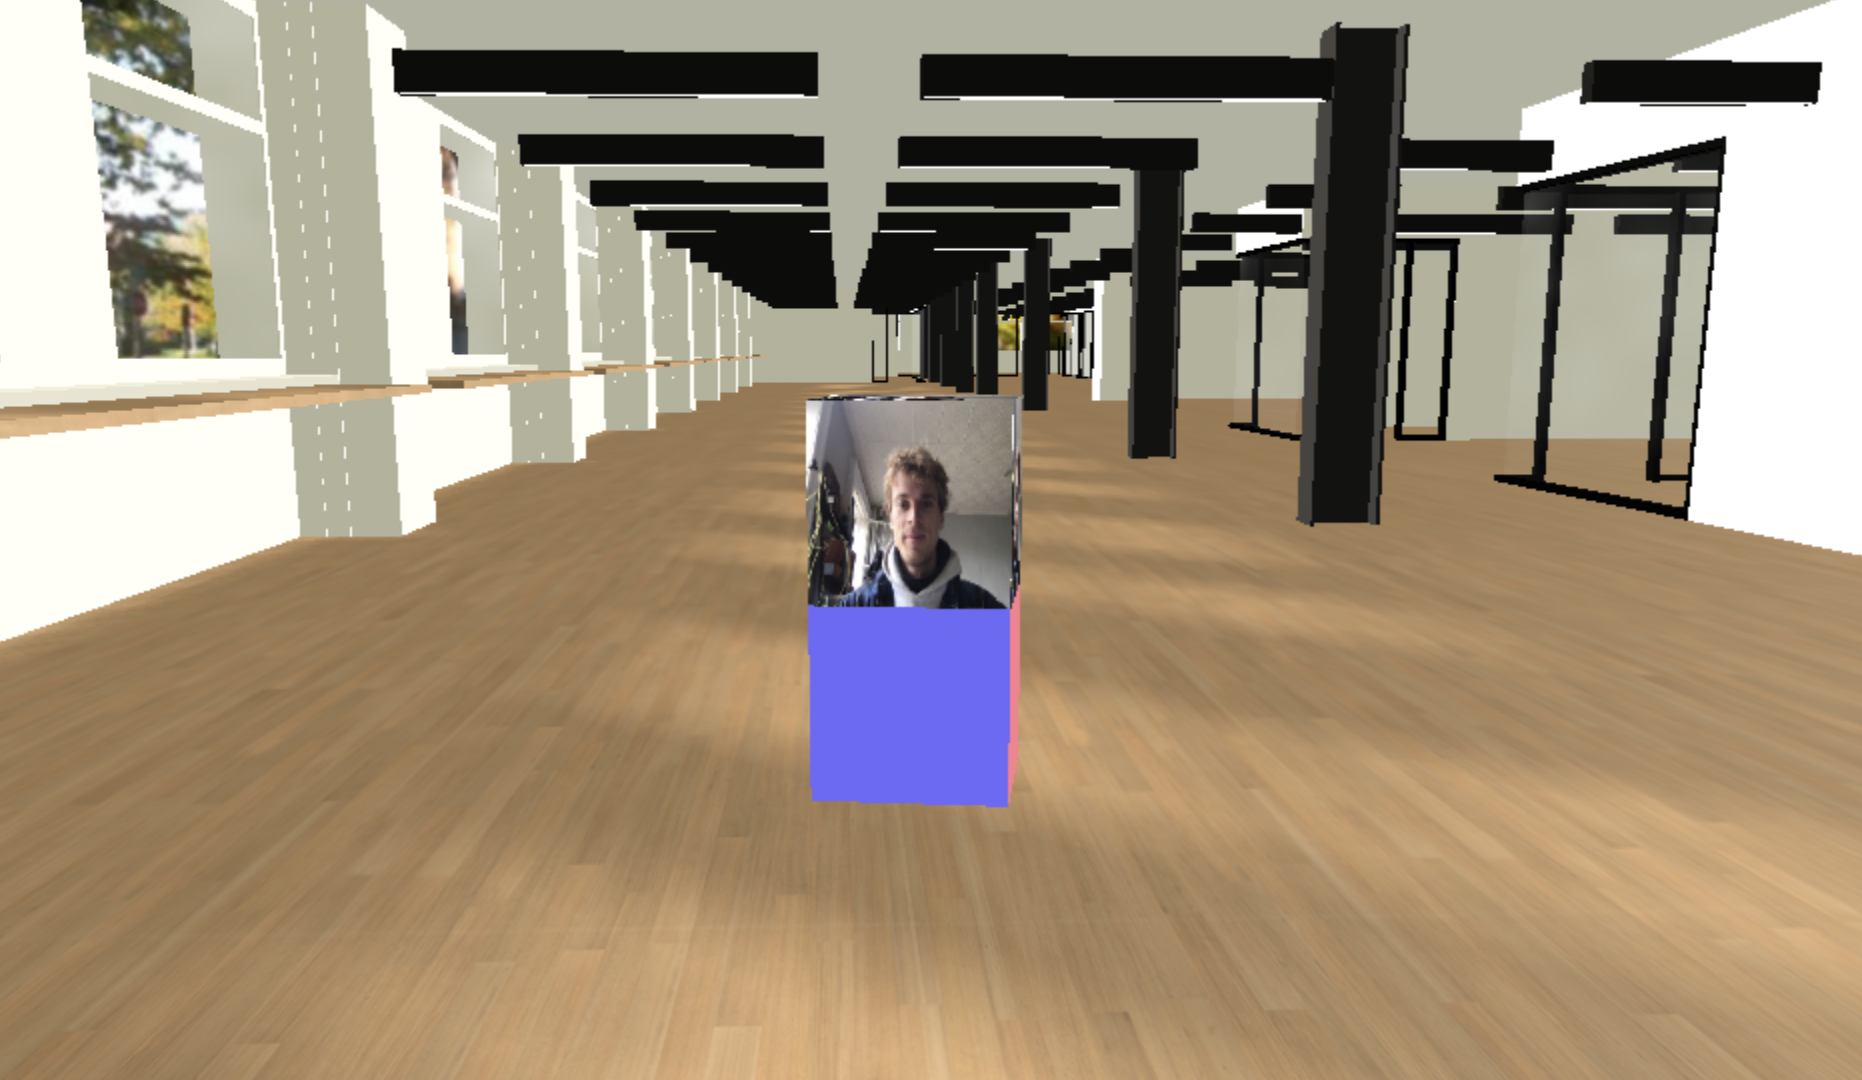 image of 3D environment with one person in it